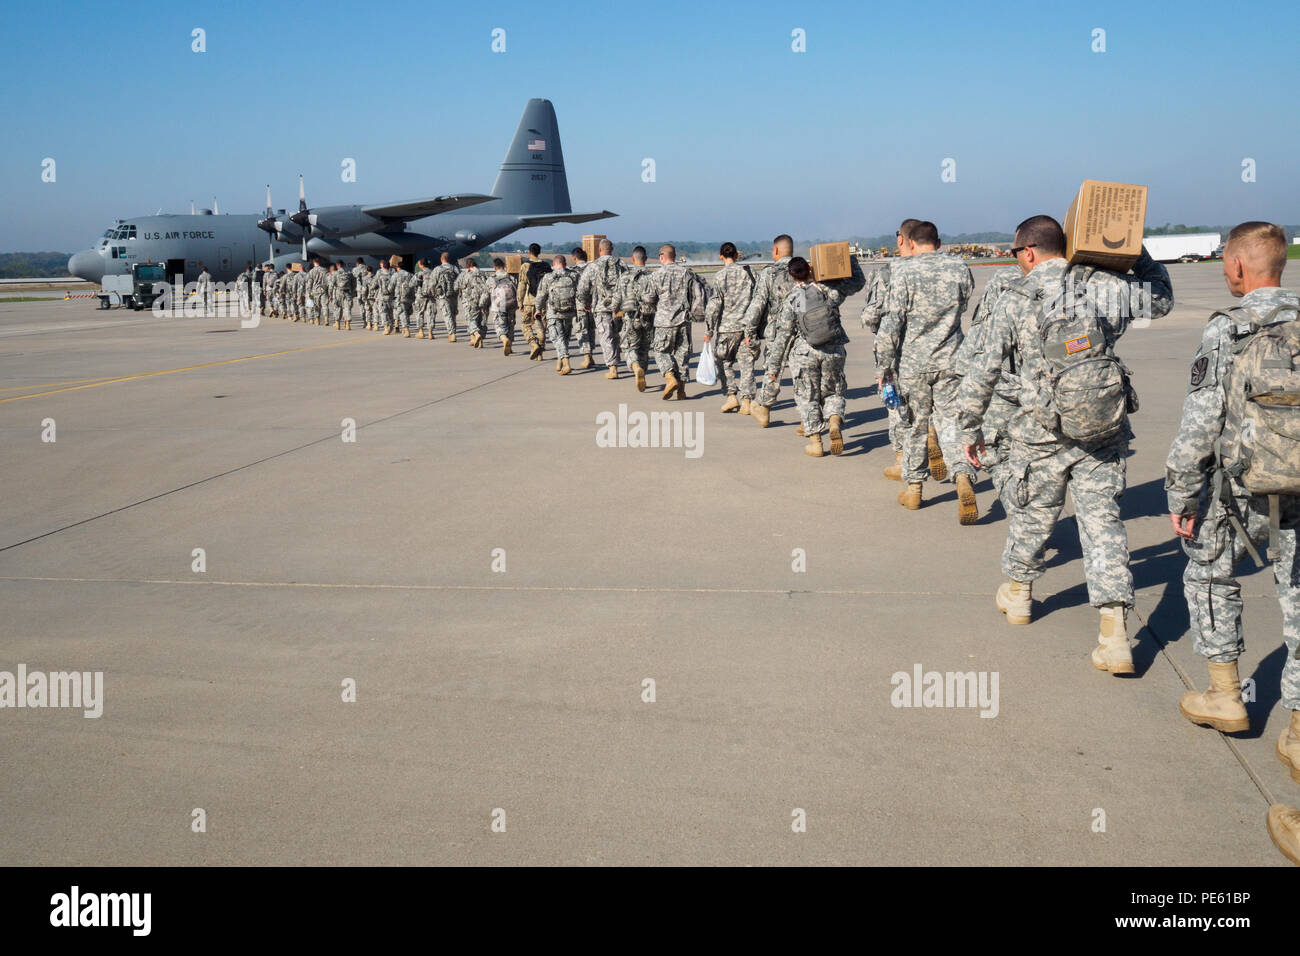 Arizona Army National Guard Soldiers from the 3666th Support Maintenance Company in Phoenix, load onto an Air Force C-130 Sept. 26, 2015 at 132nd Fighter Wing Air National Guard base in Des Moines, Iowa.  The Guardsmen had just completed their 15-day annual training at Camp Dodge Joint Maneuver Training Center in Johnston, Iowa and were heading back home. (U.S. Army National Guard photo by Staff Sgt. Brian A. Barbour) Stock Photo